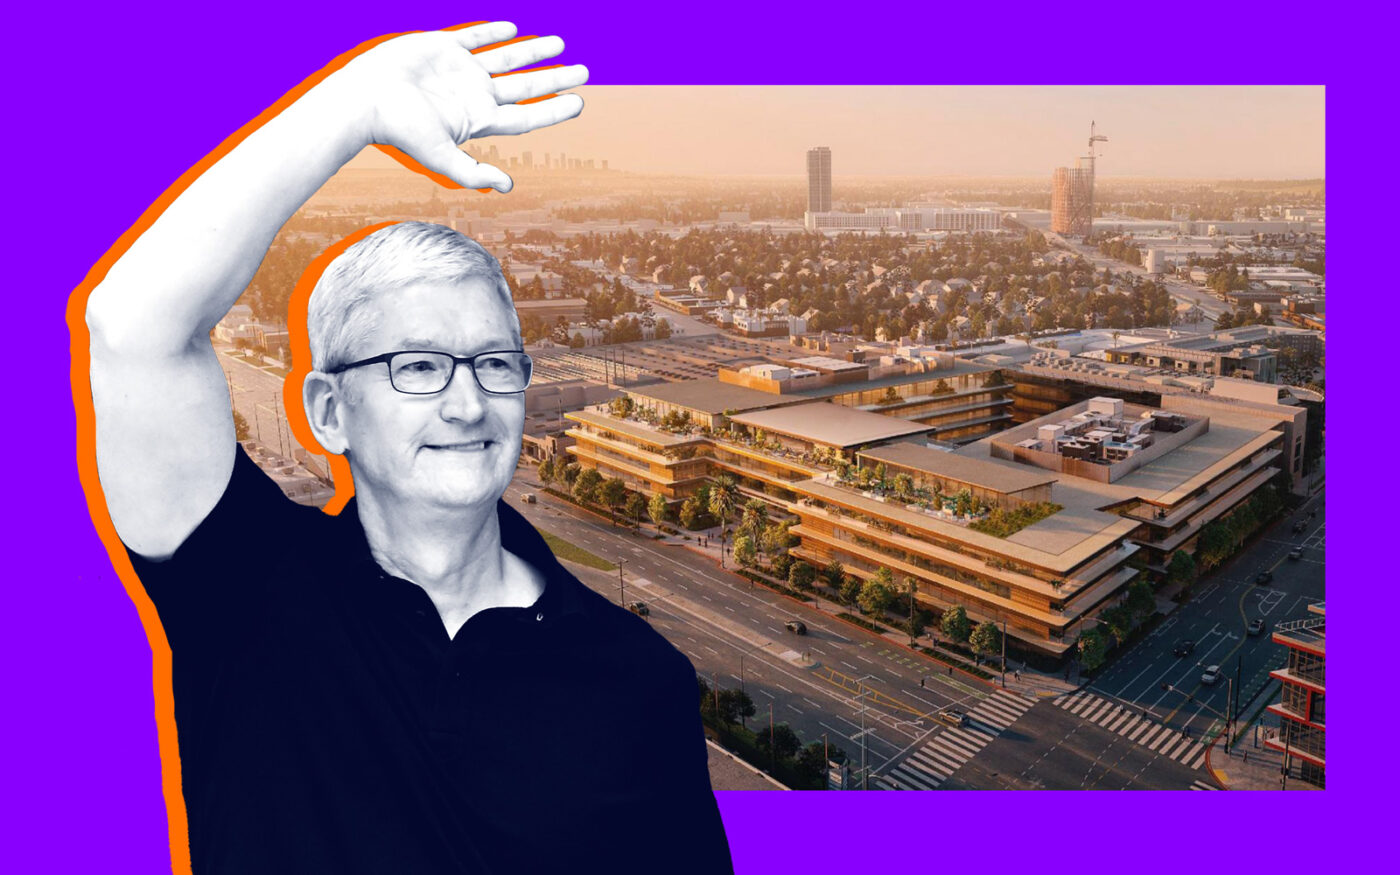 Apple's Tim Cook and a rendering of the office campus